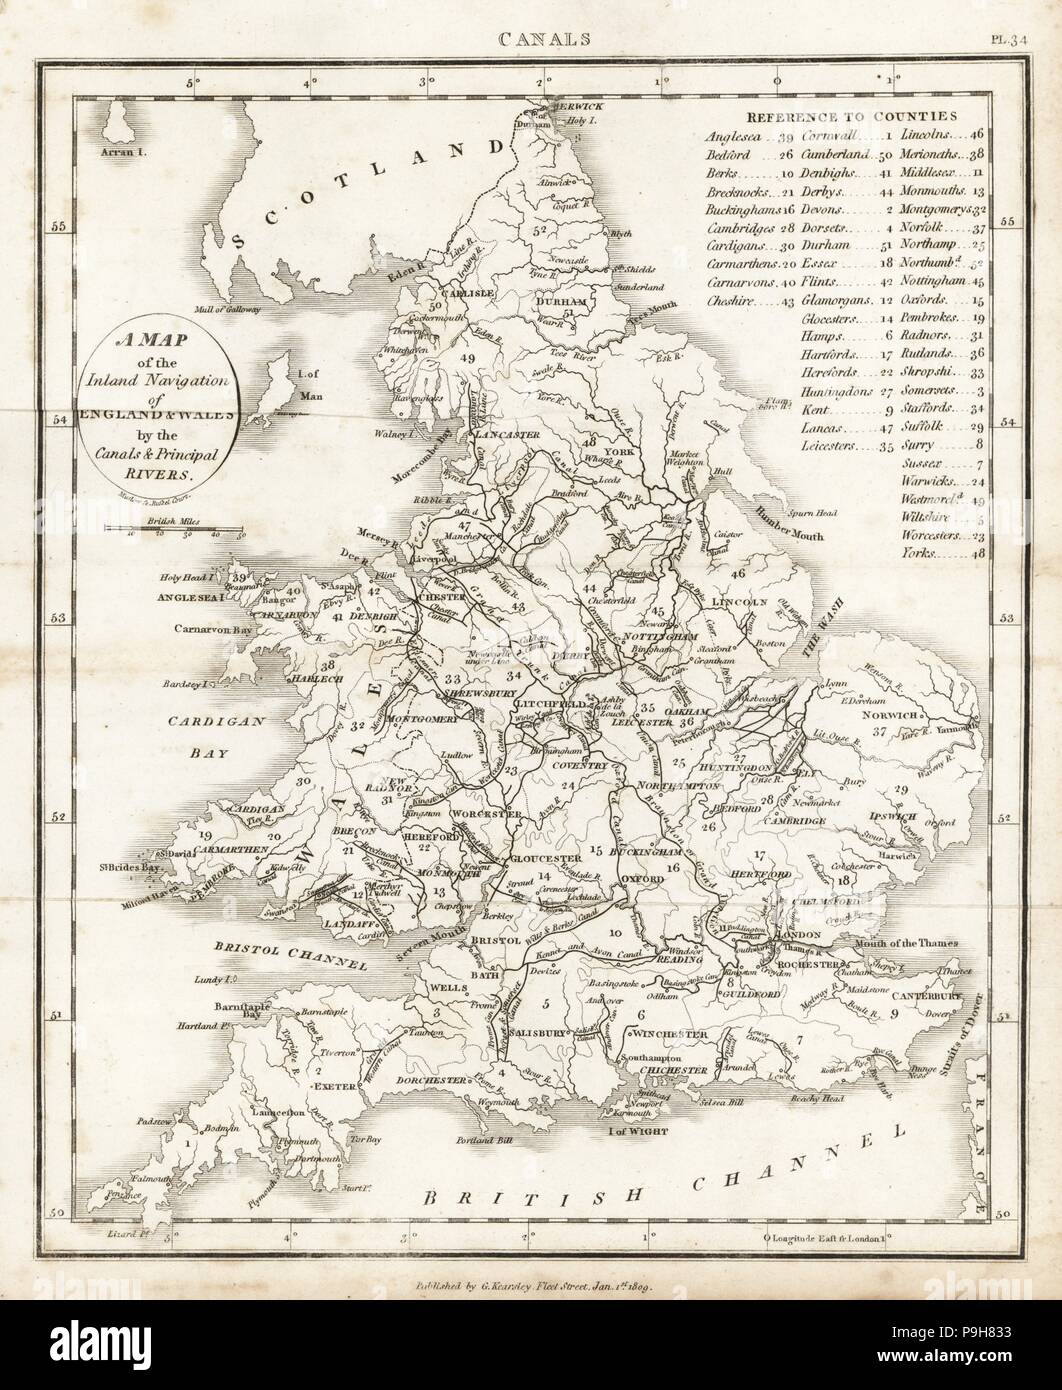 Map of the inland navigation of England and Wales by the canals and principal rivers, 1809. Copperplate engraving by Mutlow from John Mason Good's Pantologia, a New Encyclopedia, G. Kearsley, London, 1813. Stock Photo